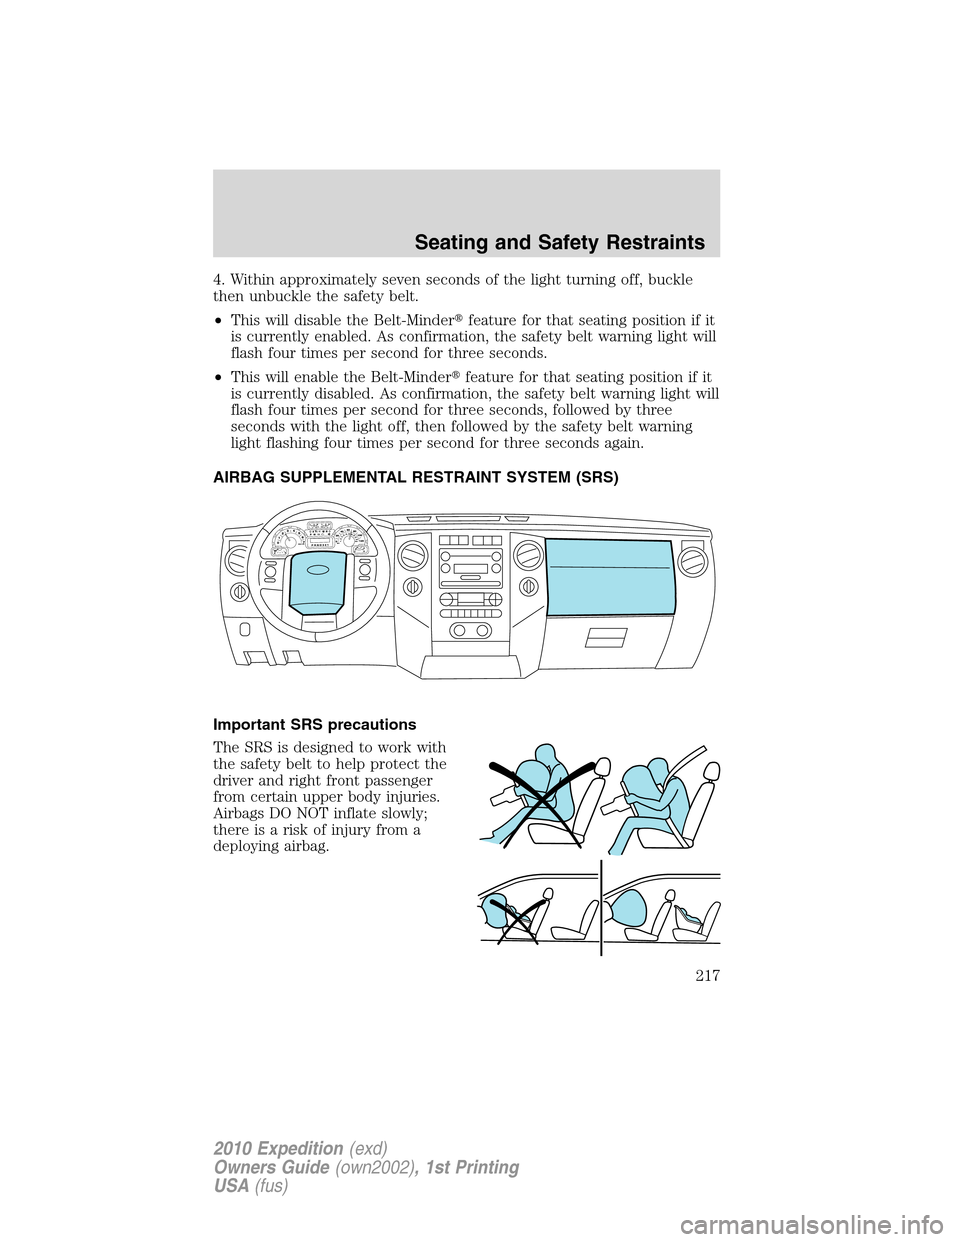 FORD EXPEDITION 2010 3.G Owners Manual 4. Within approximately seven seconds of the light turning off, buckle
then unbuckle the safety belt.
•This will disable the Belt-Minderfeature for that seating position if it
is currently enabled.